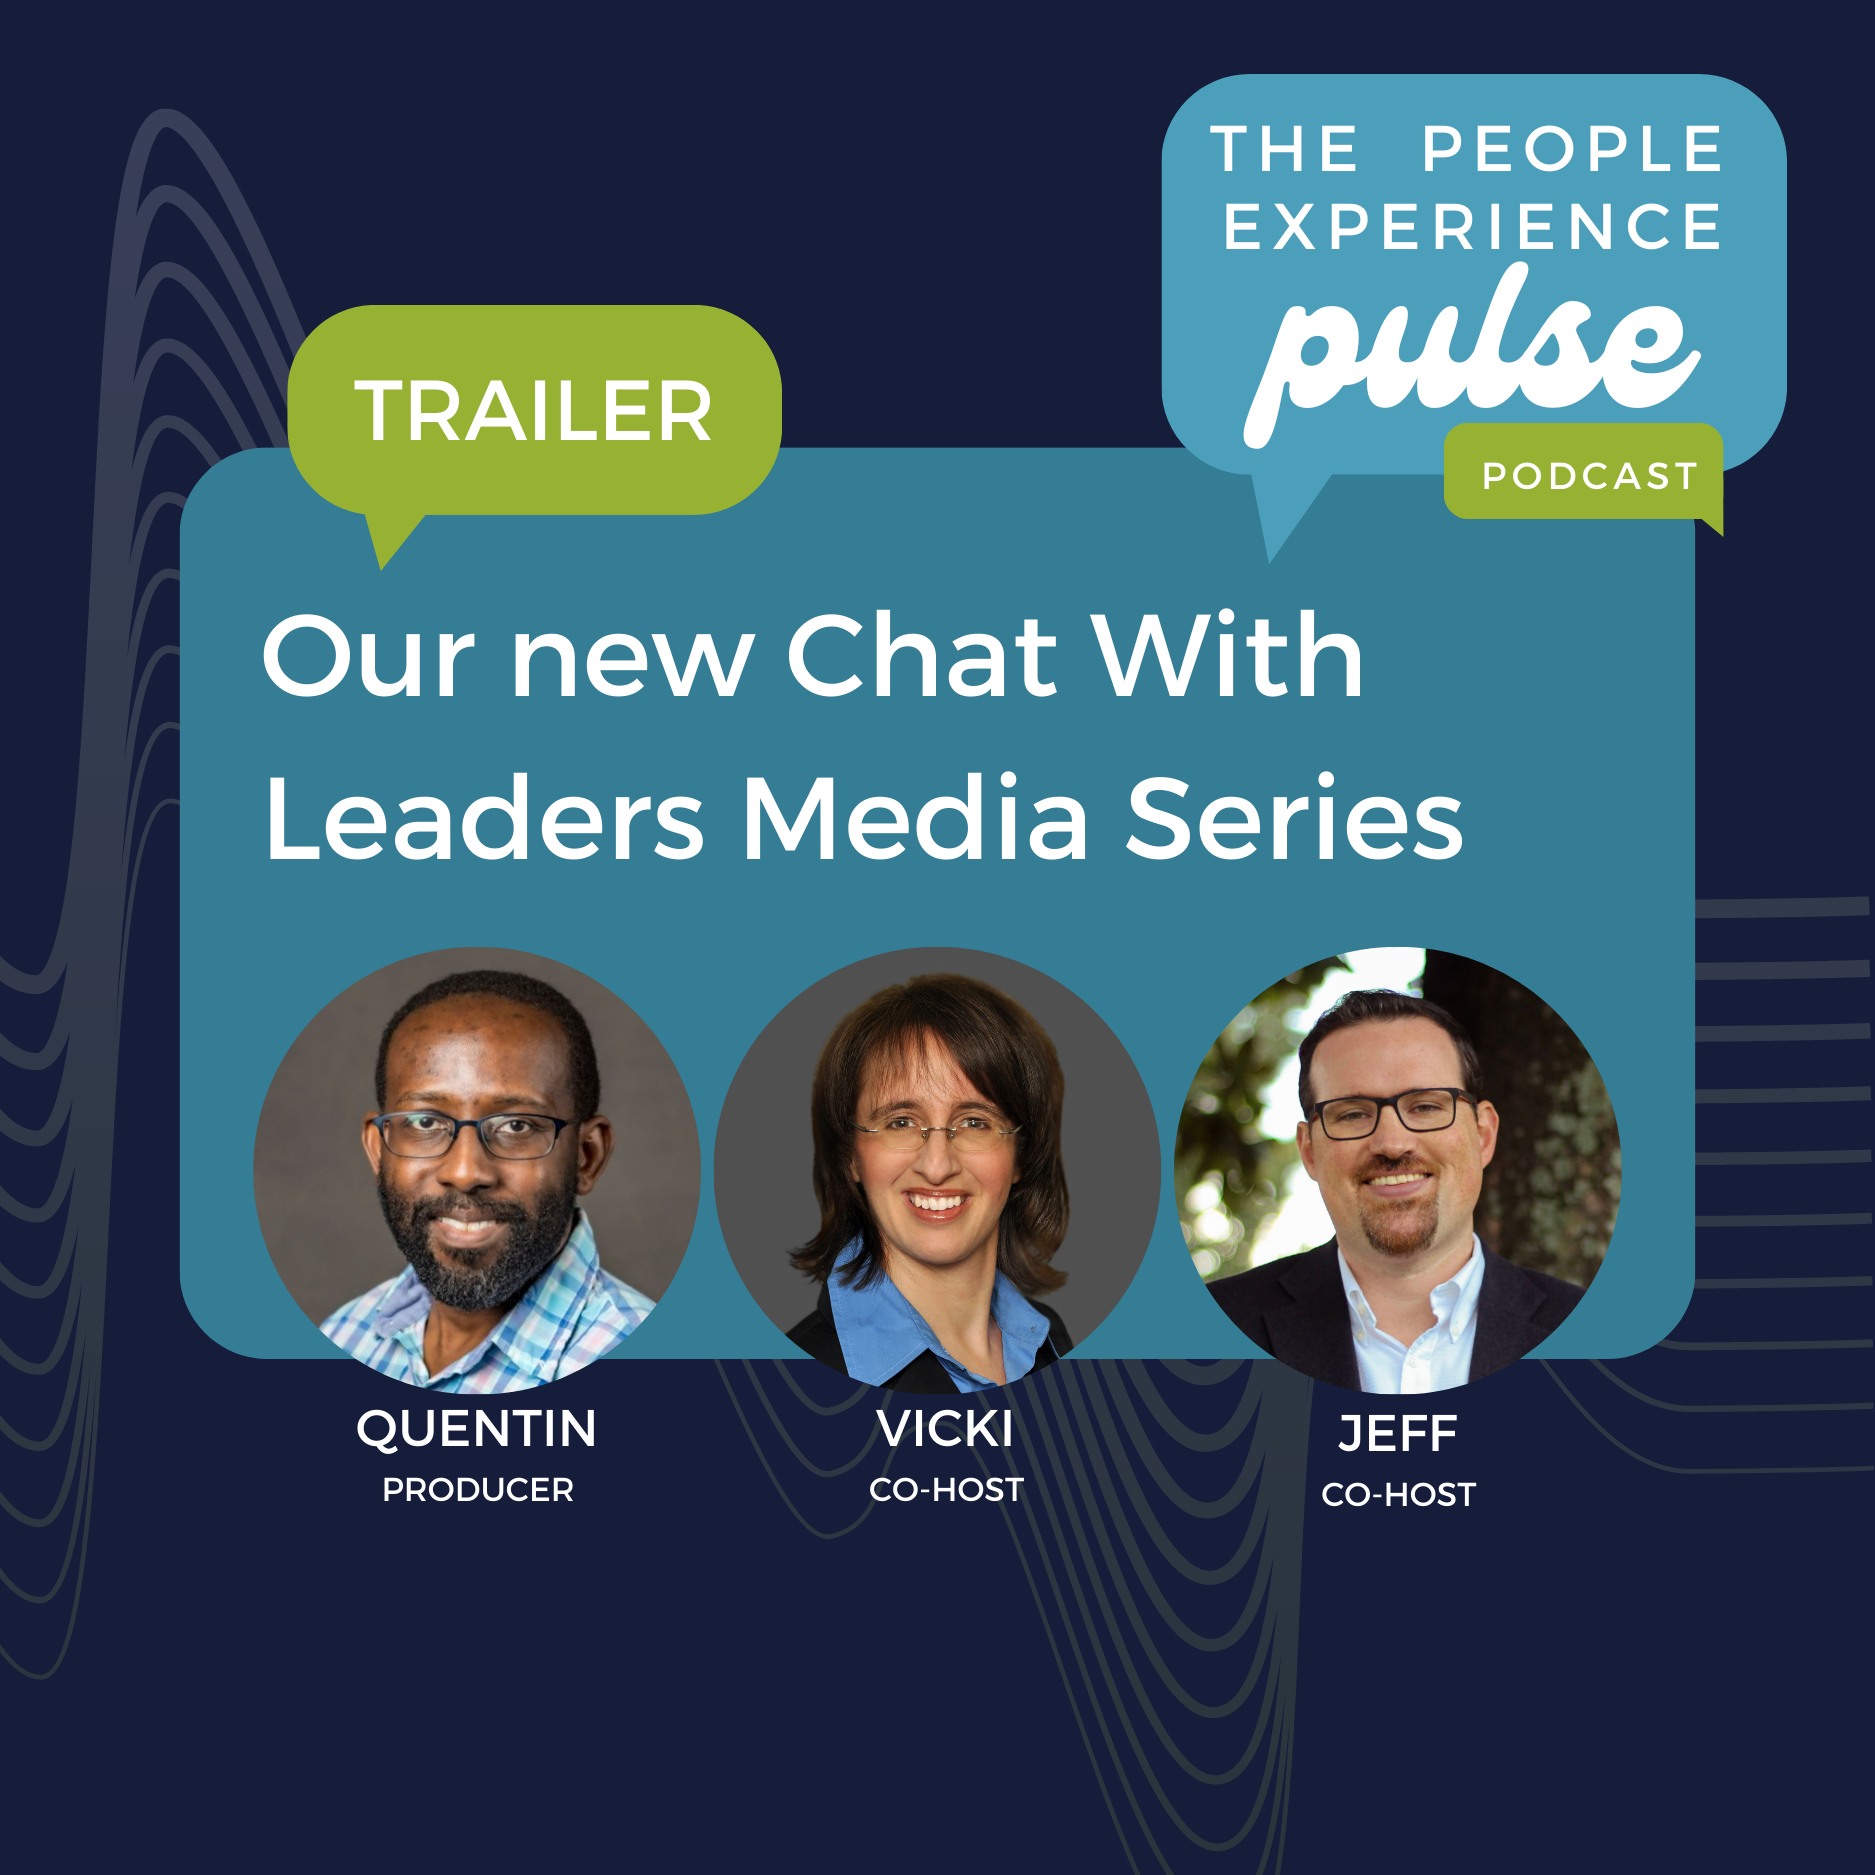 Introducing The People Experience Pulse podcast